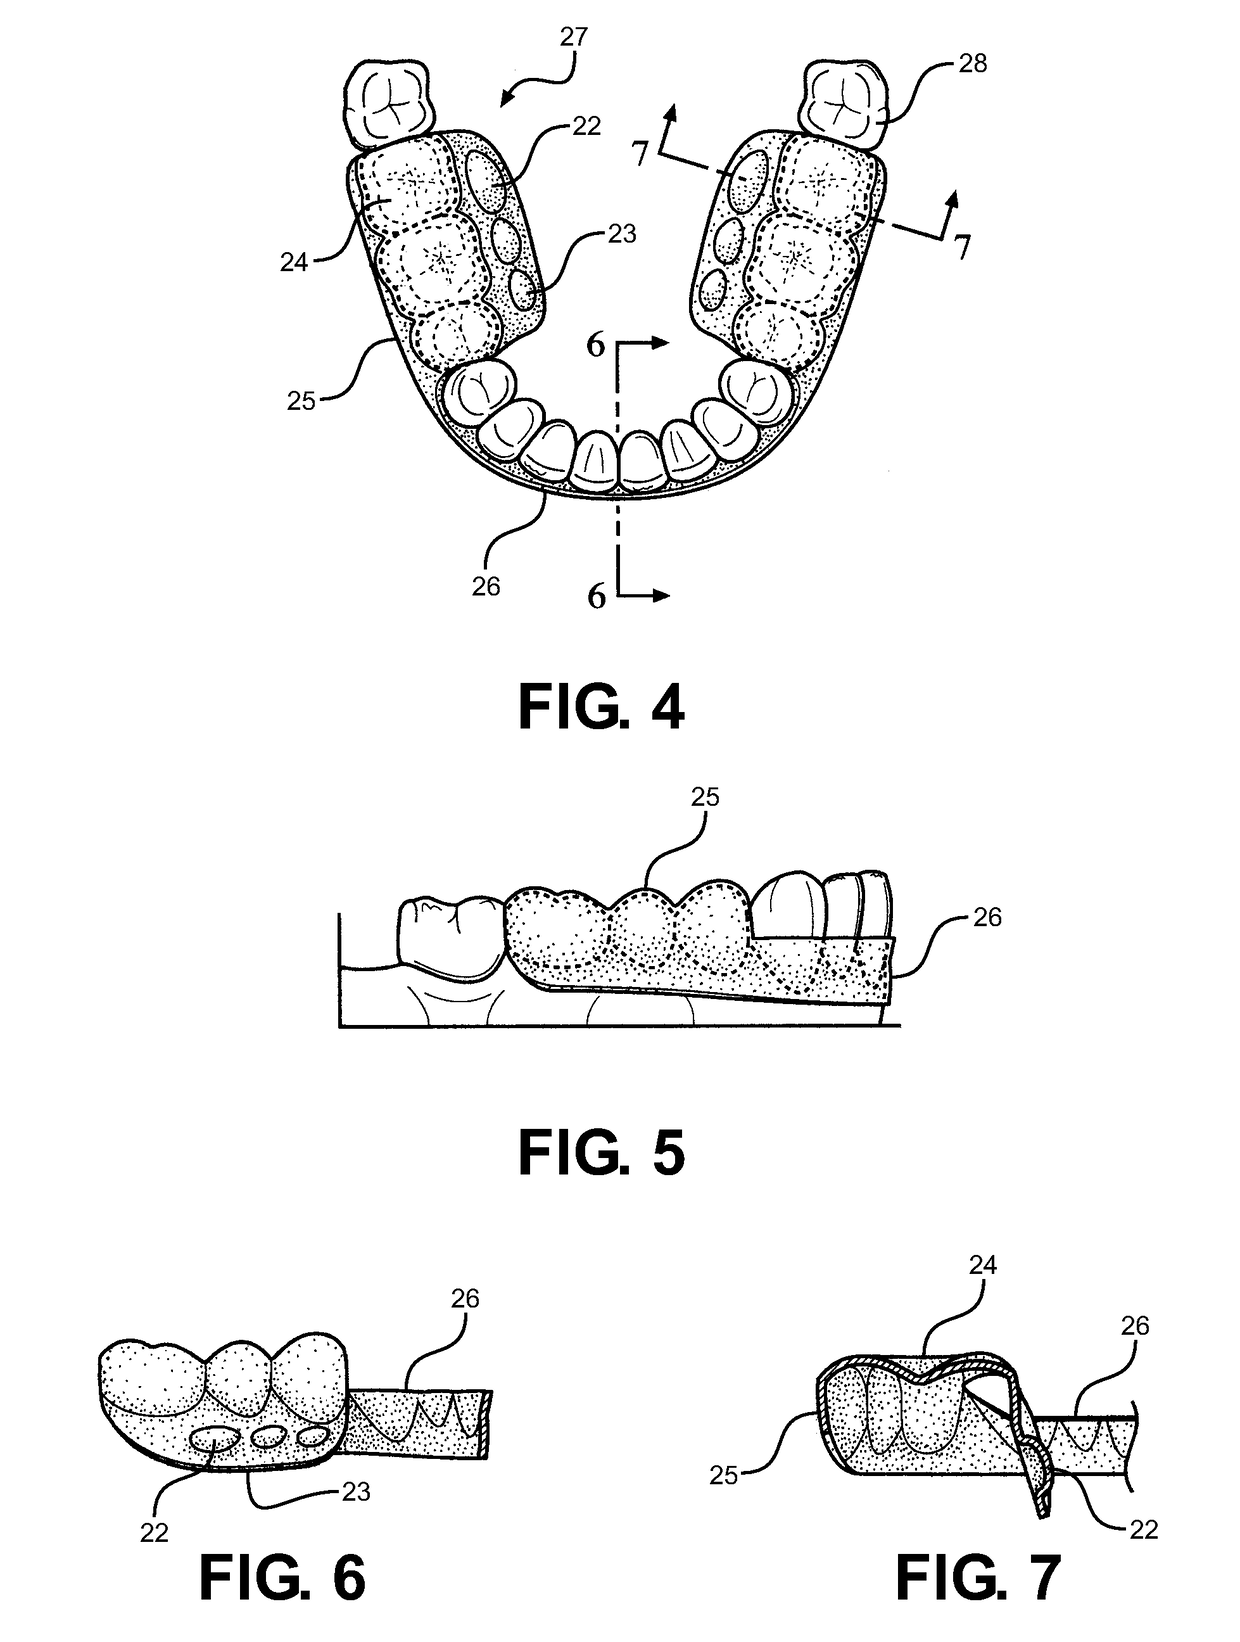 Method and Oral Appliance for Improving Air Intake and Reducing Bruxism